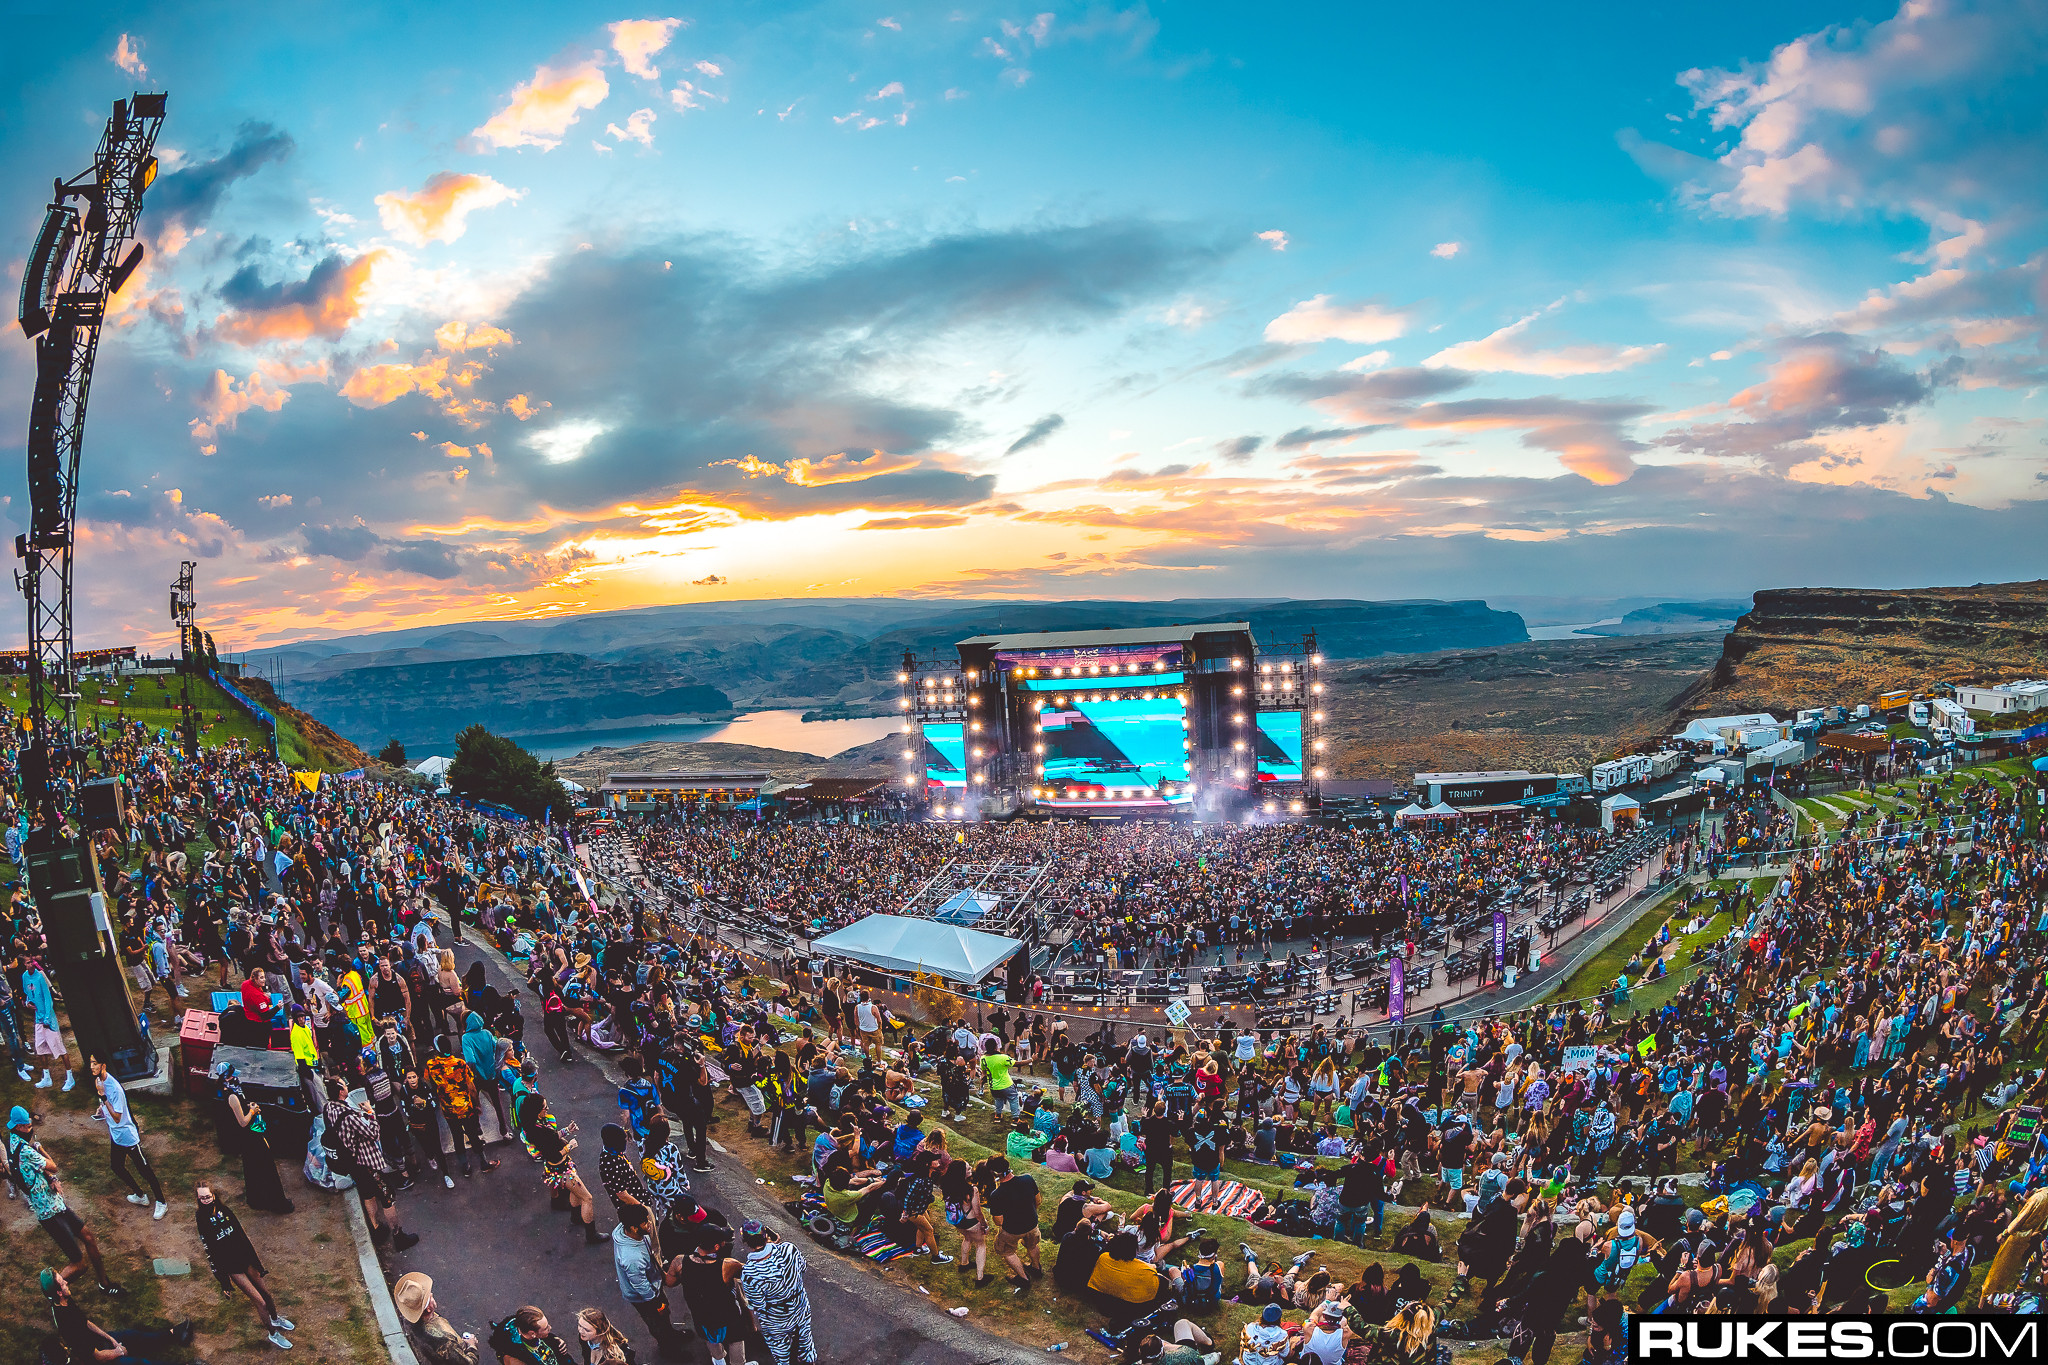 With dates set for Bass Canyon, here's our wish list for the lineup